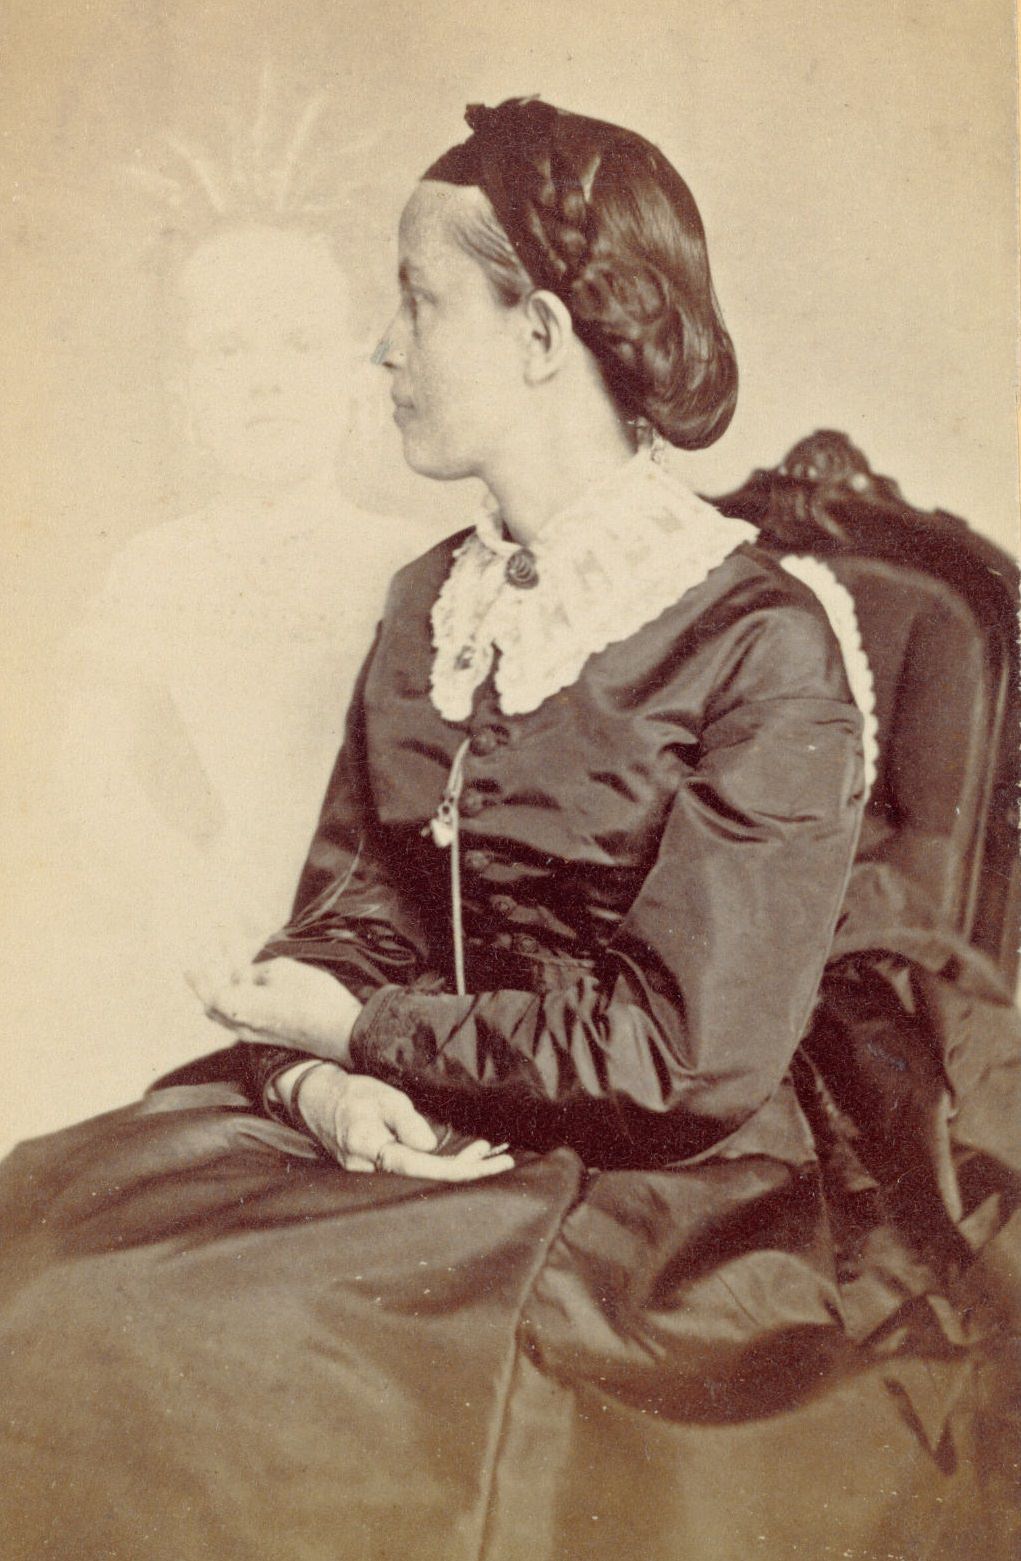 Profile portrait of Ella Bonner, with a faint image of a child visible next to her.